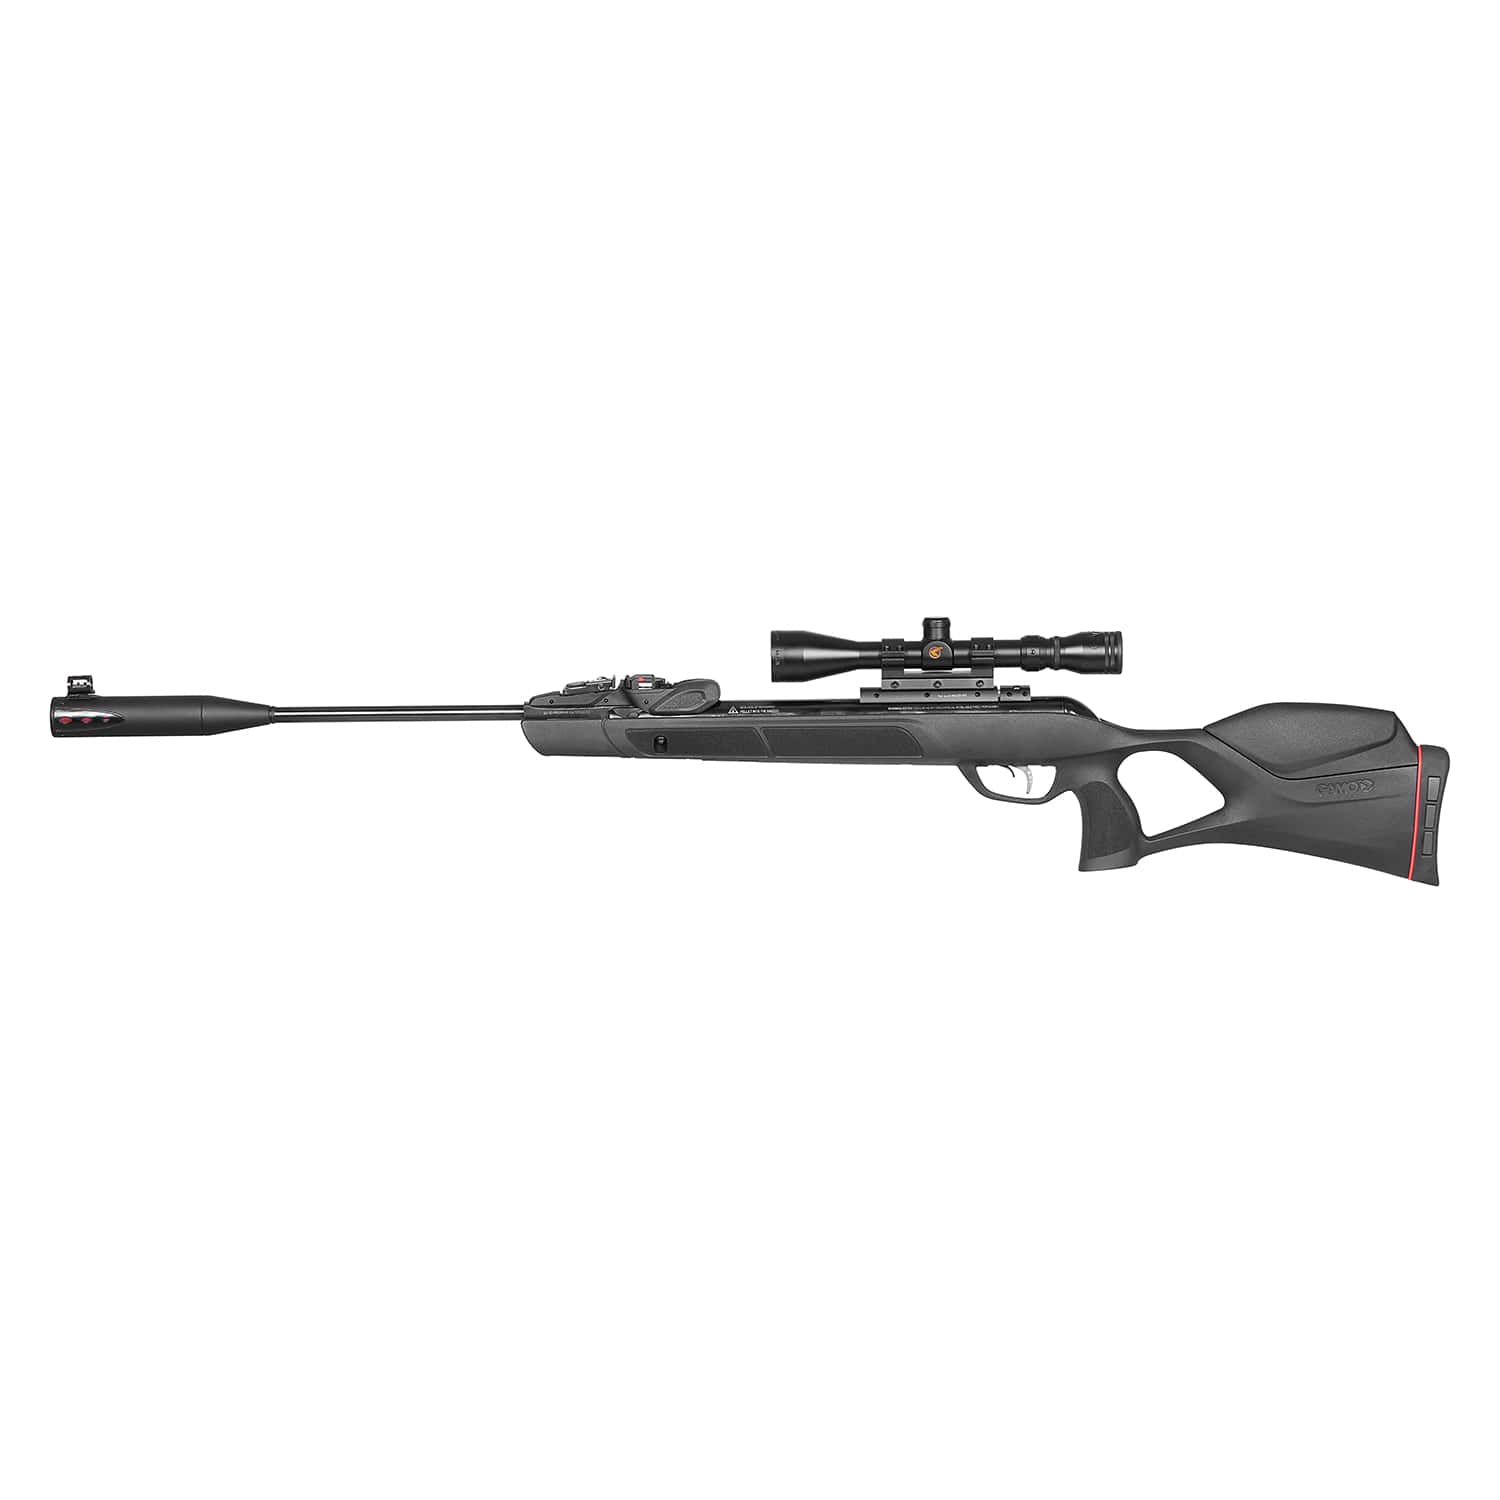 GAMO 6110038654 Swarm Magnum G2 .177cal IGT Gas Piston Powered Pellet Air Rifle with 3-9x40mm Scope